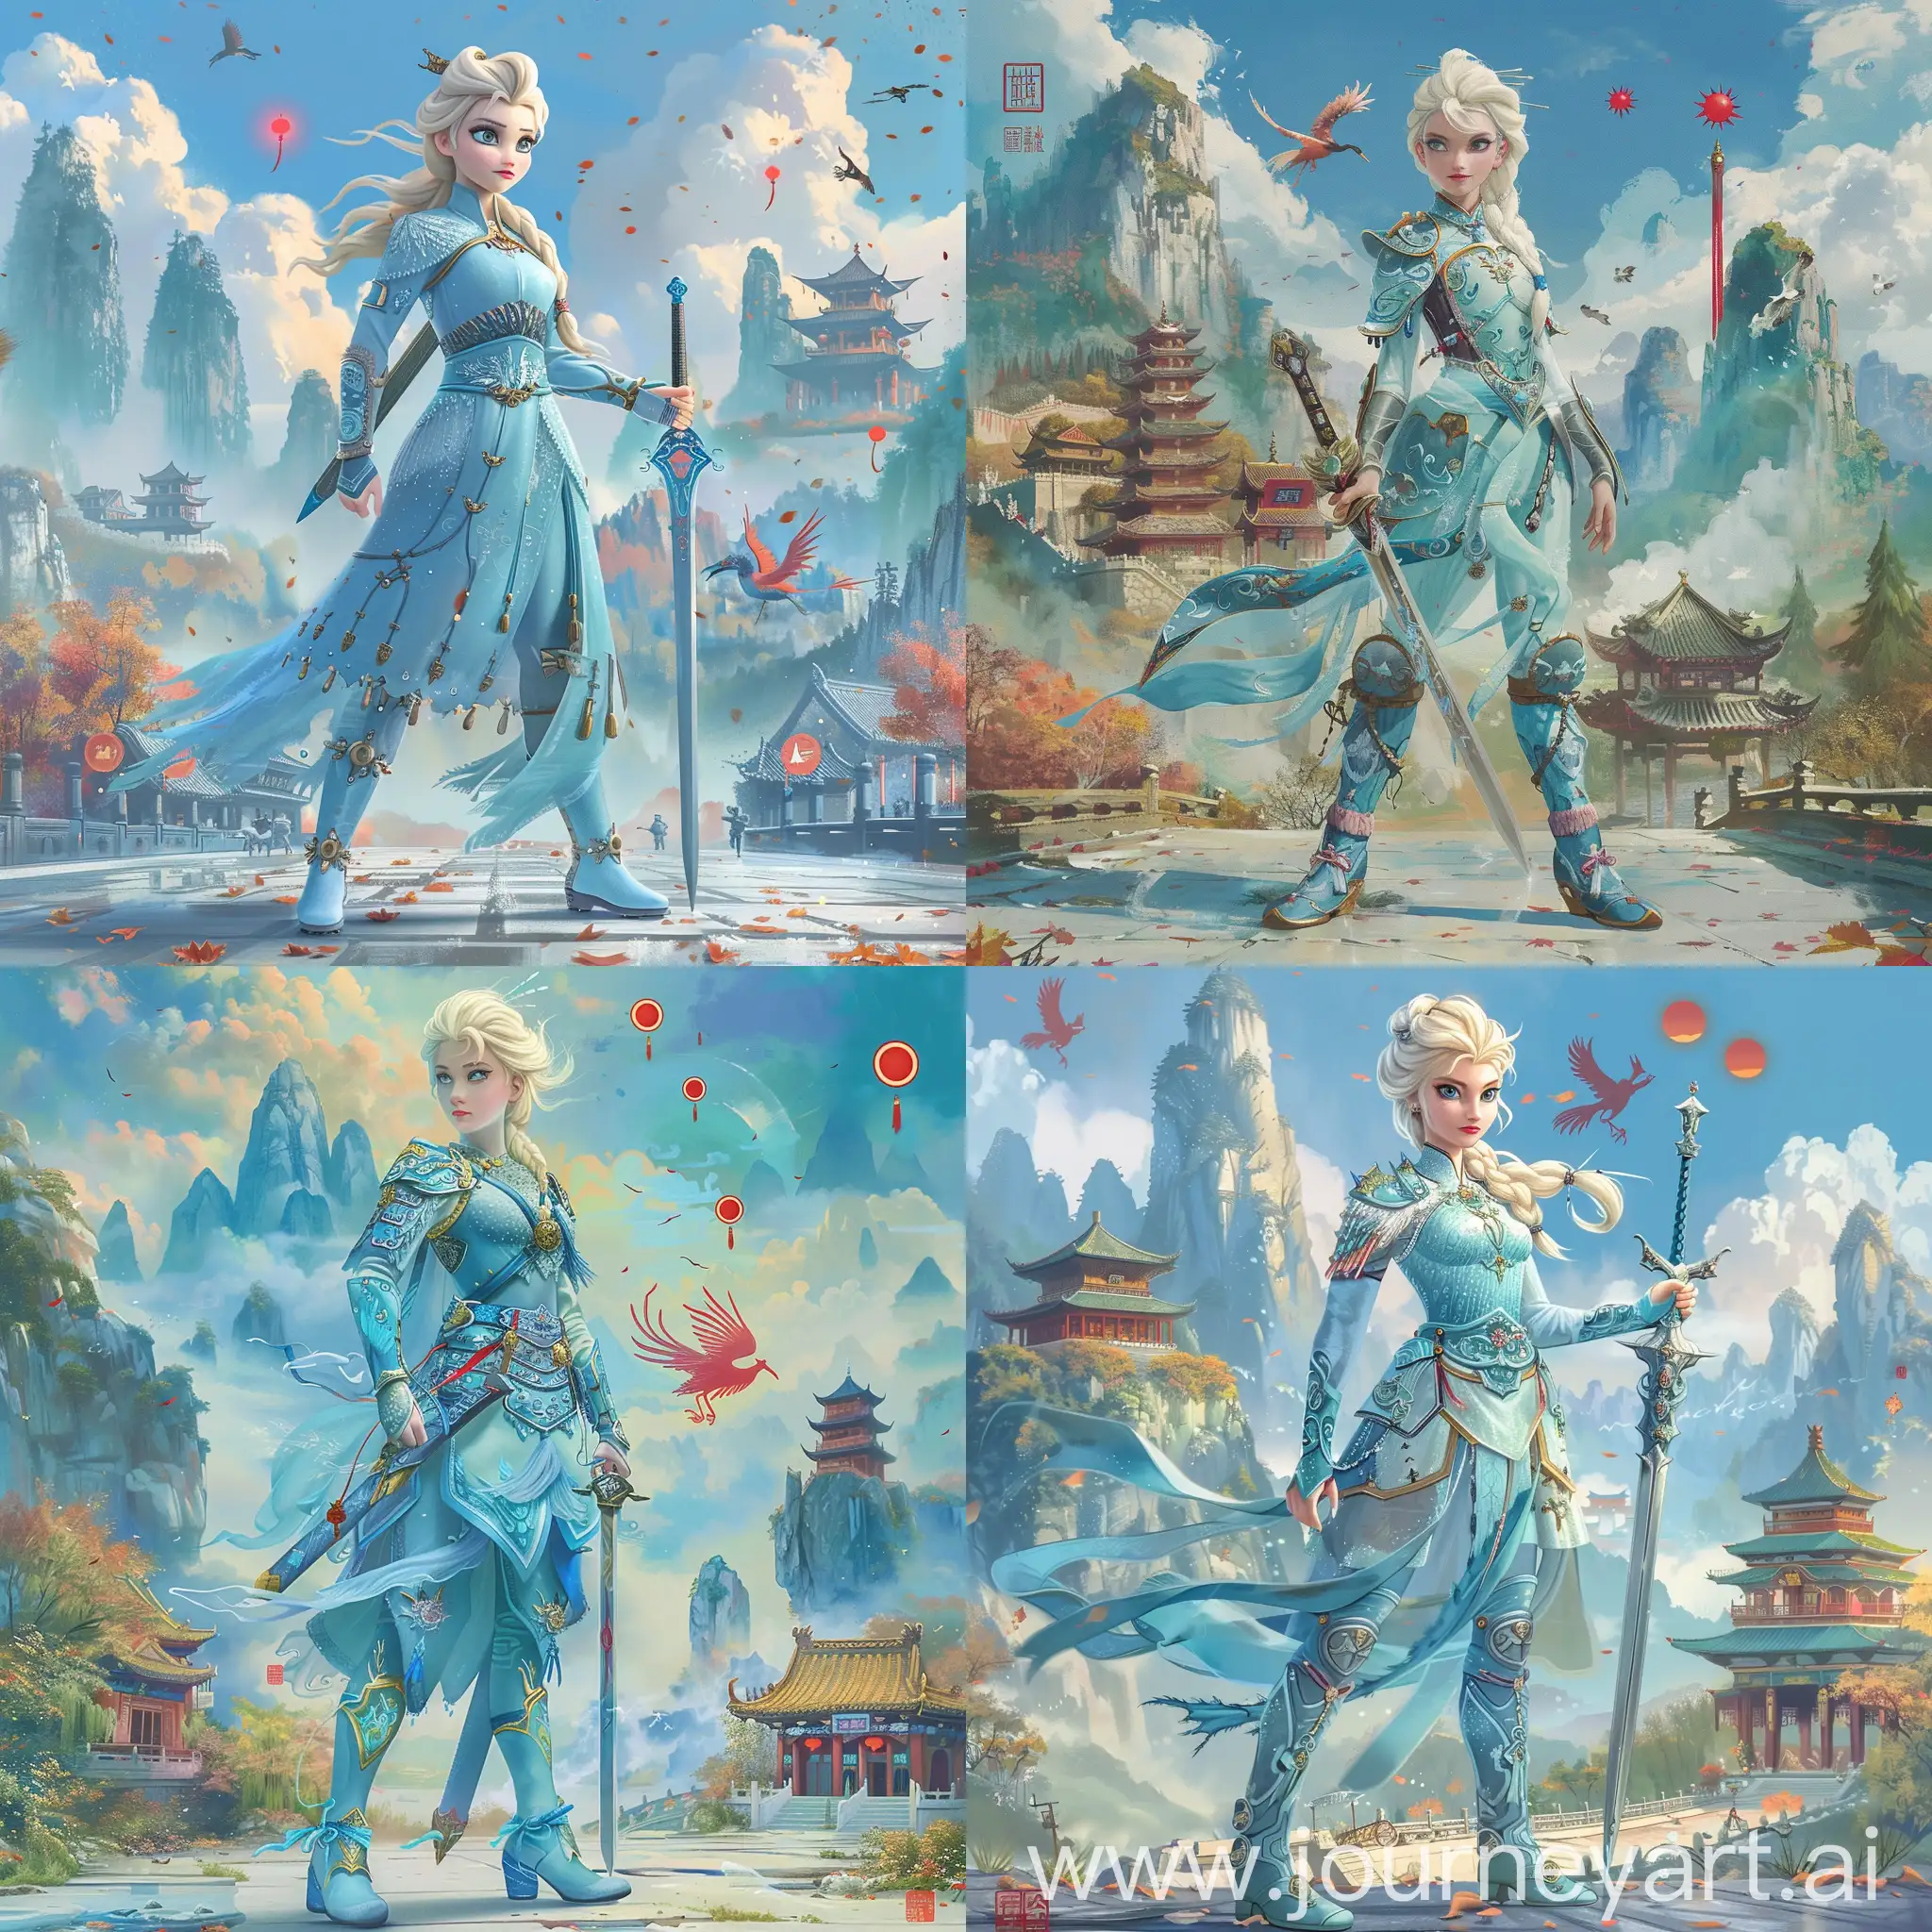 Medieval-Chinese-Princess-Elsa-with-Sword-in-Guilin-Temple-Setting